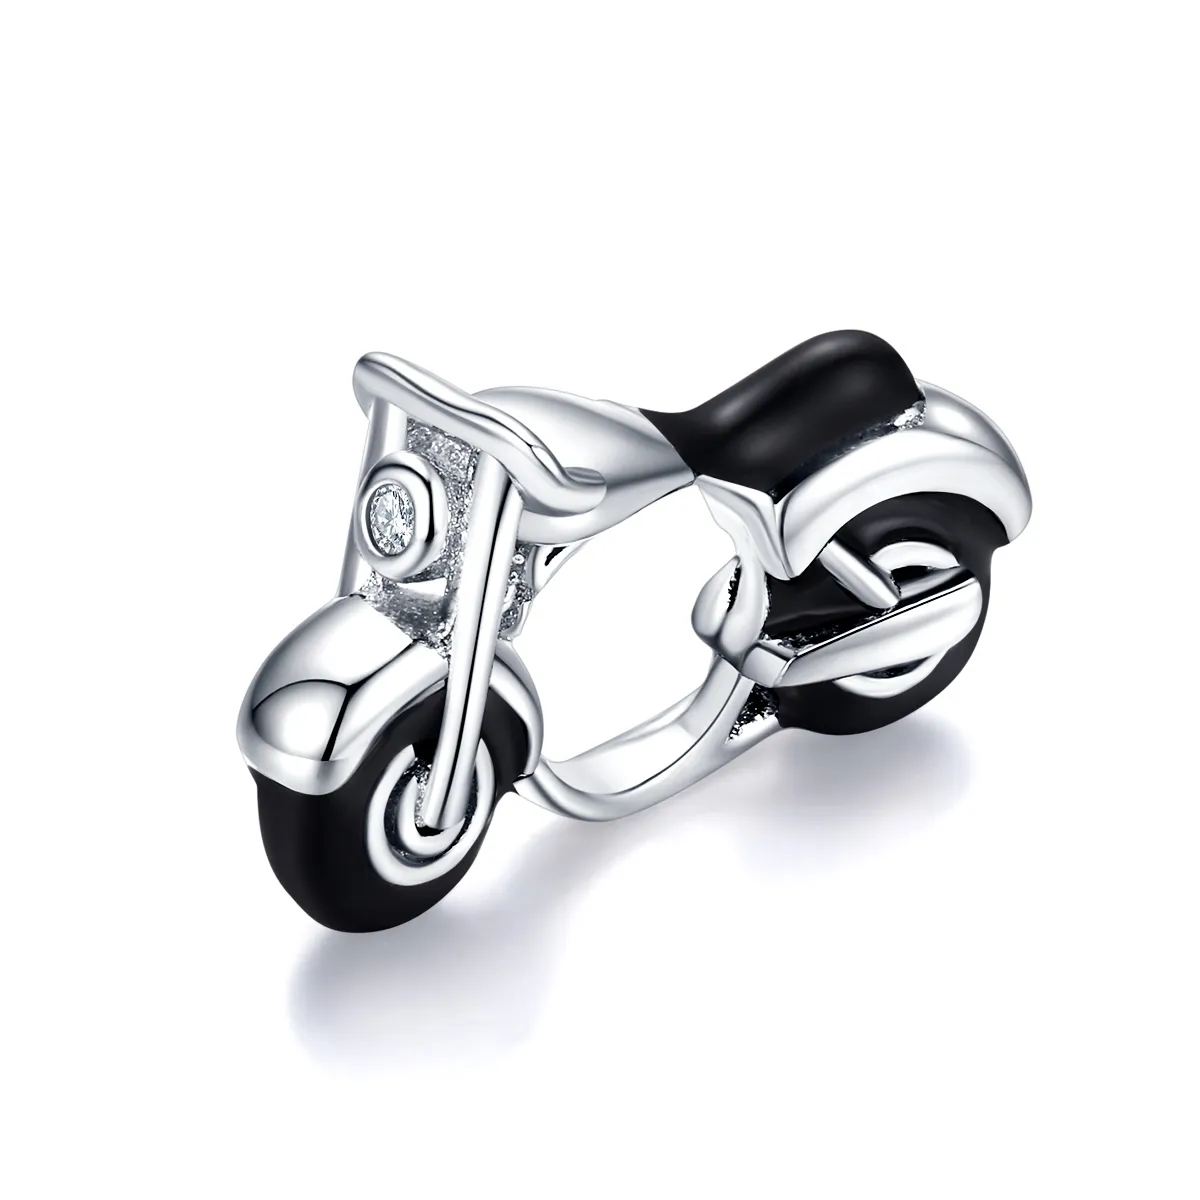 Pandora Style Cool Motorcycle Charm - BSC273